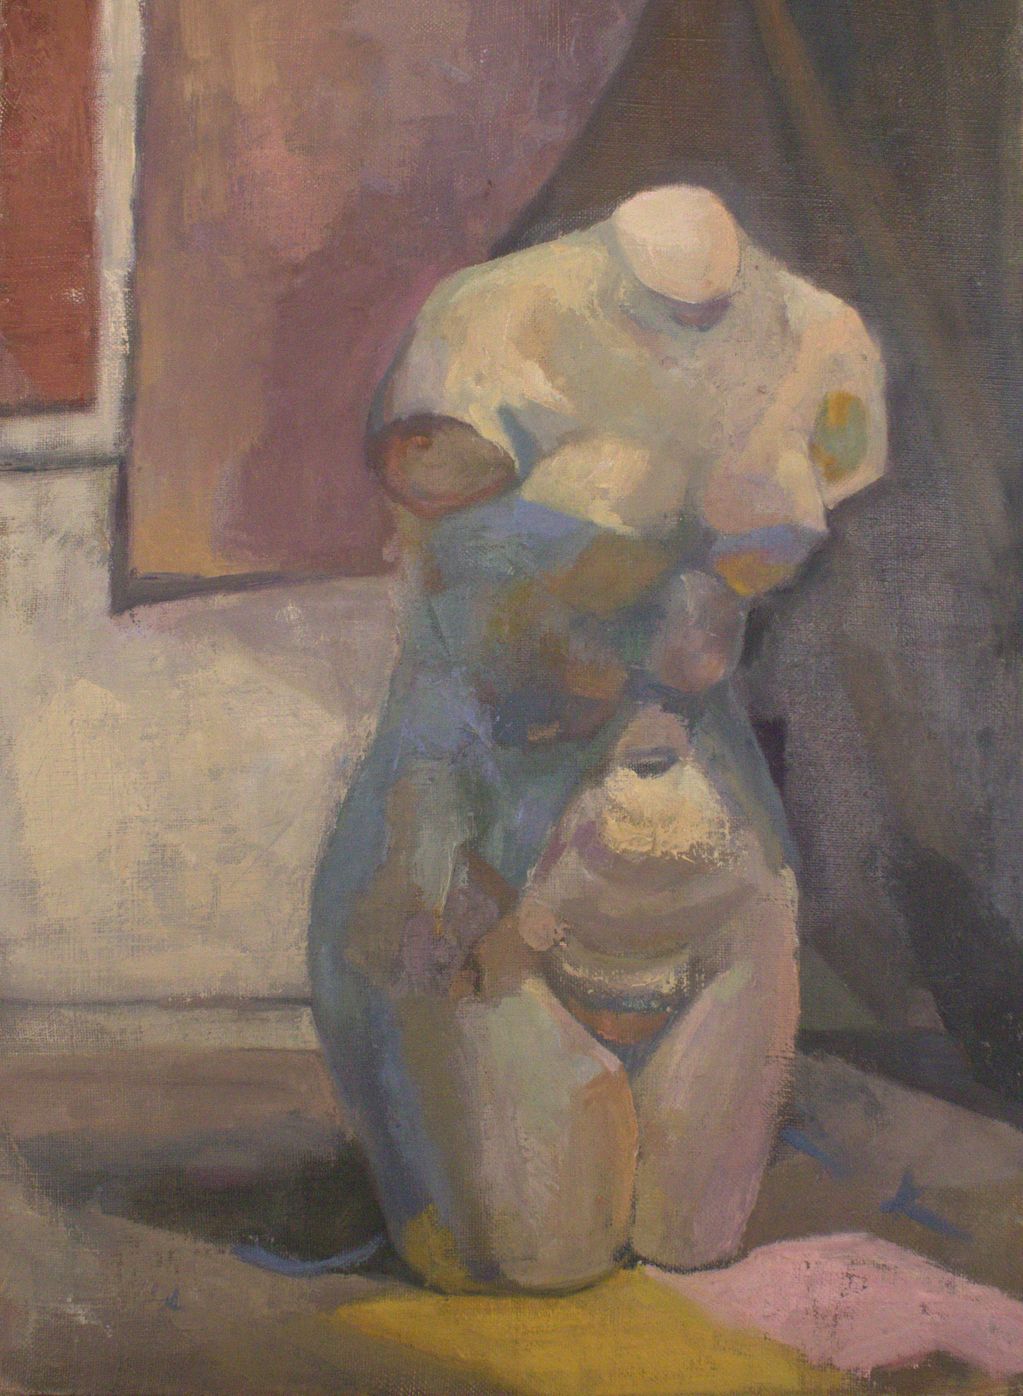 oil painting on linen of a studio bust .
still life fine original painting.